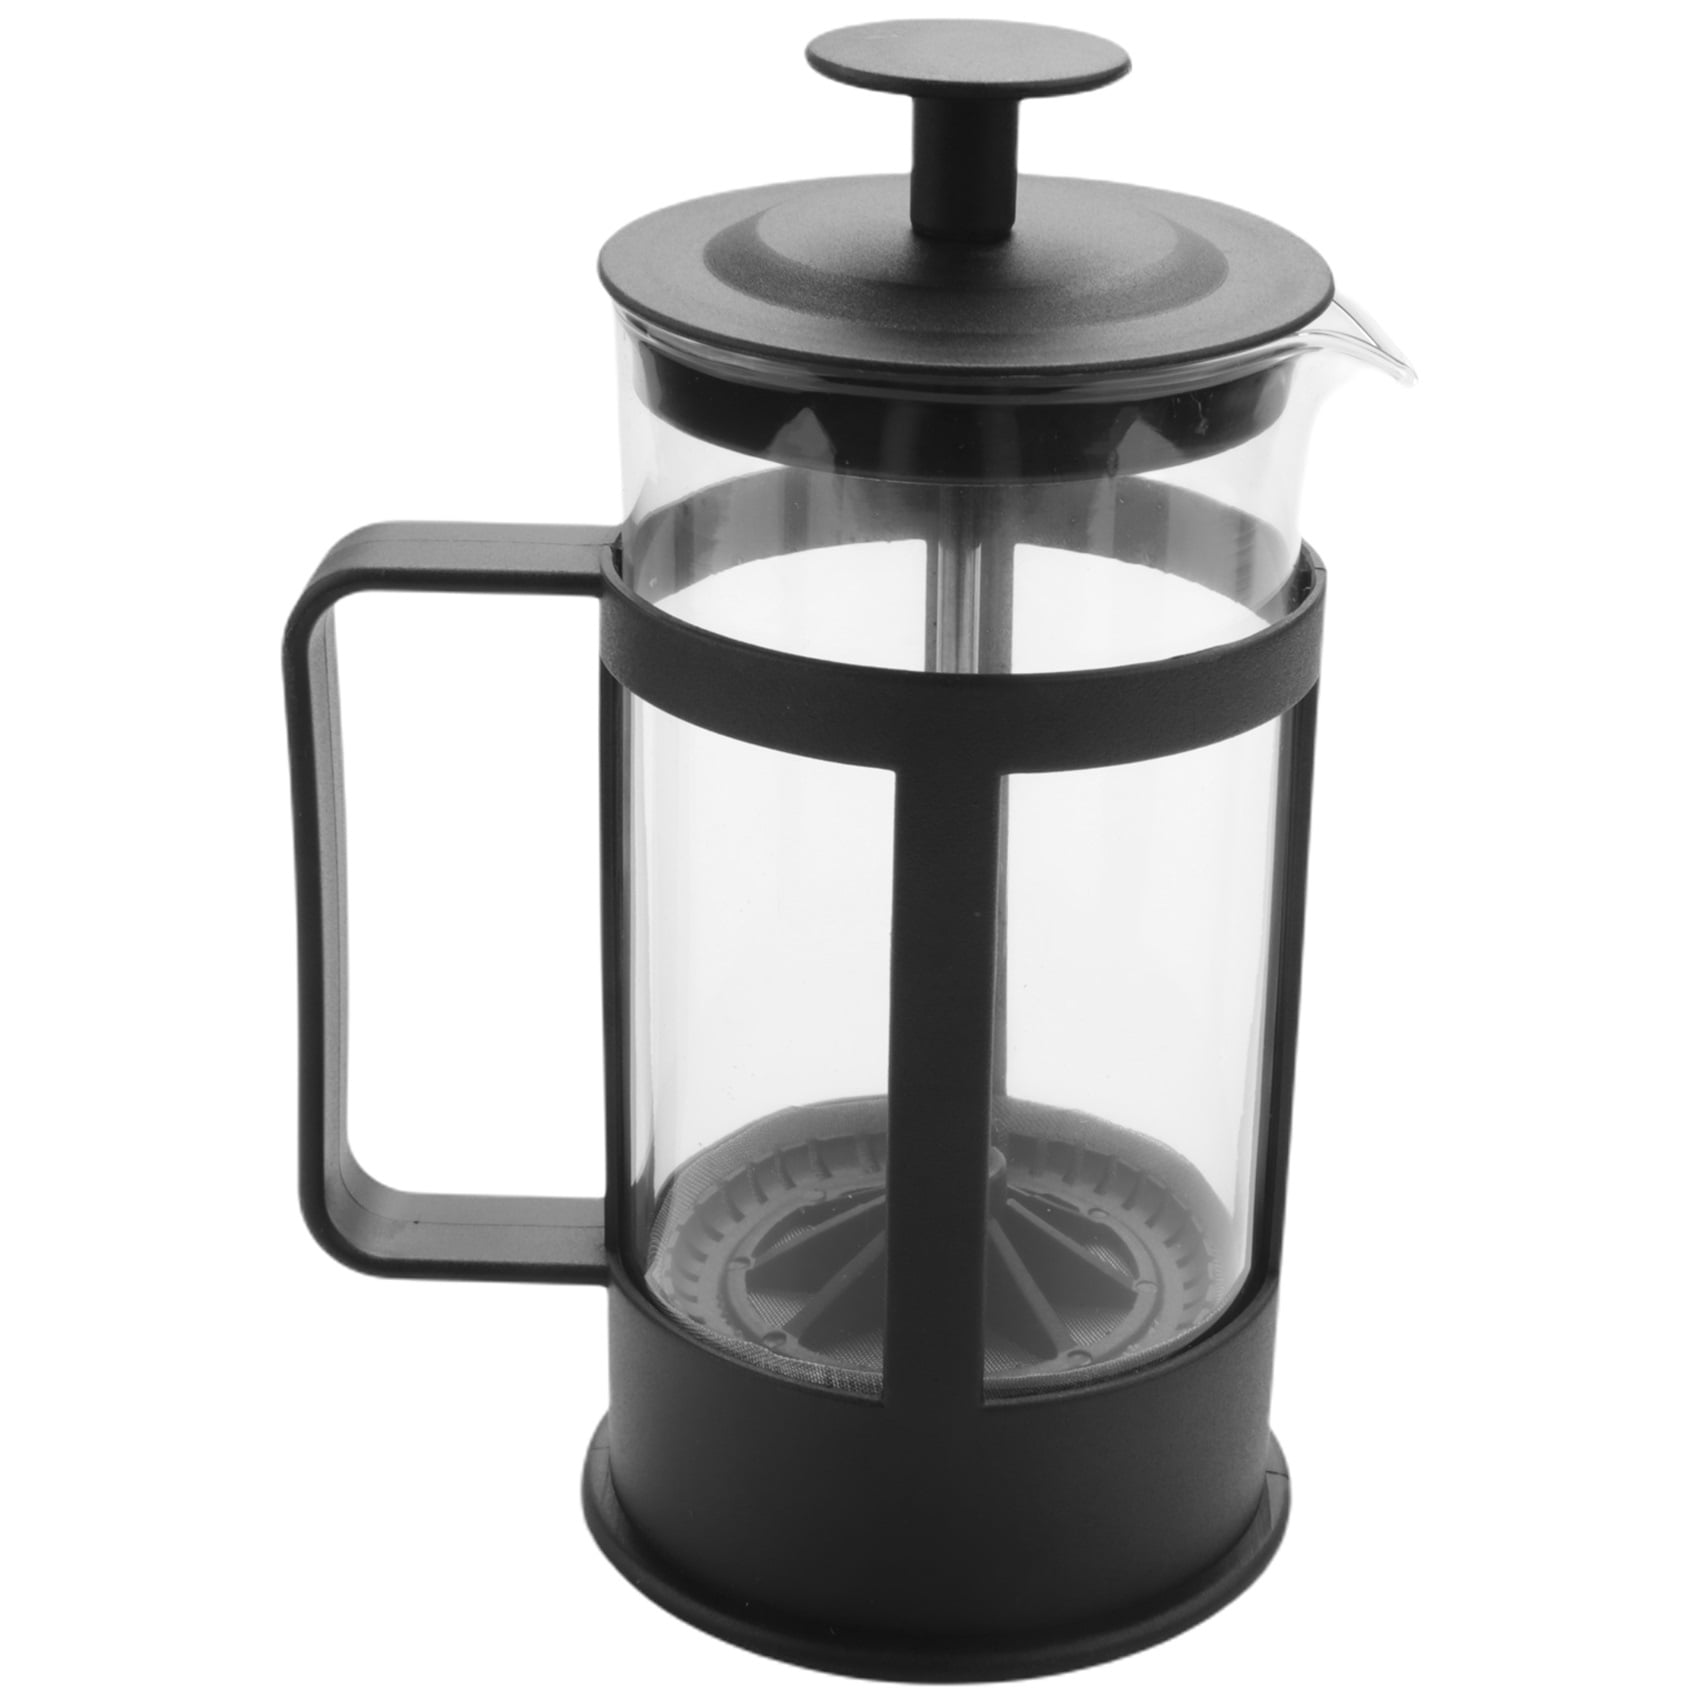 20 oz Pyrex French Coffee Press Glass Stainless Steel Espresso Tea Maker  Beans